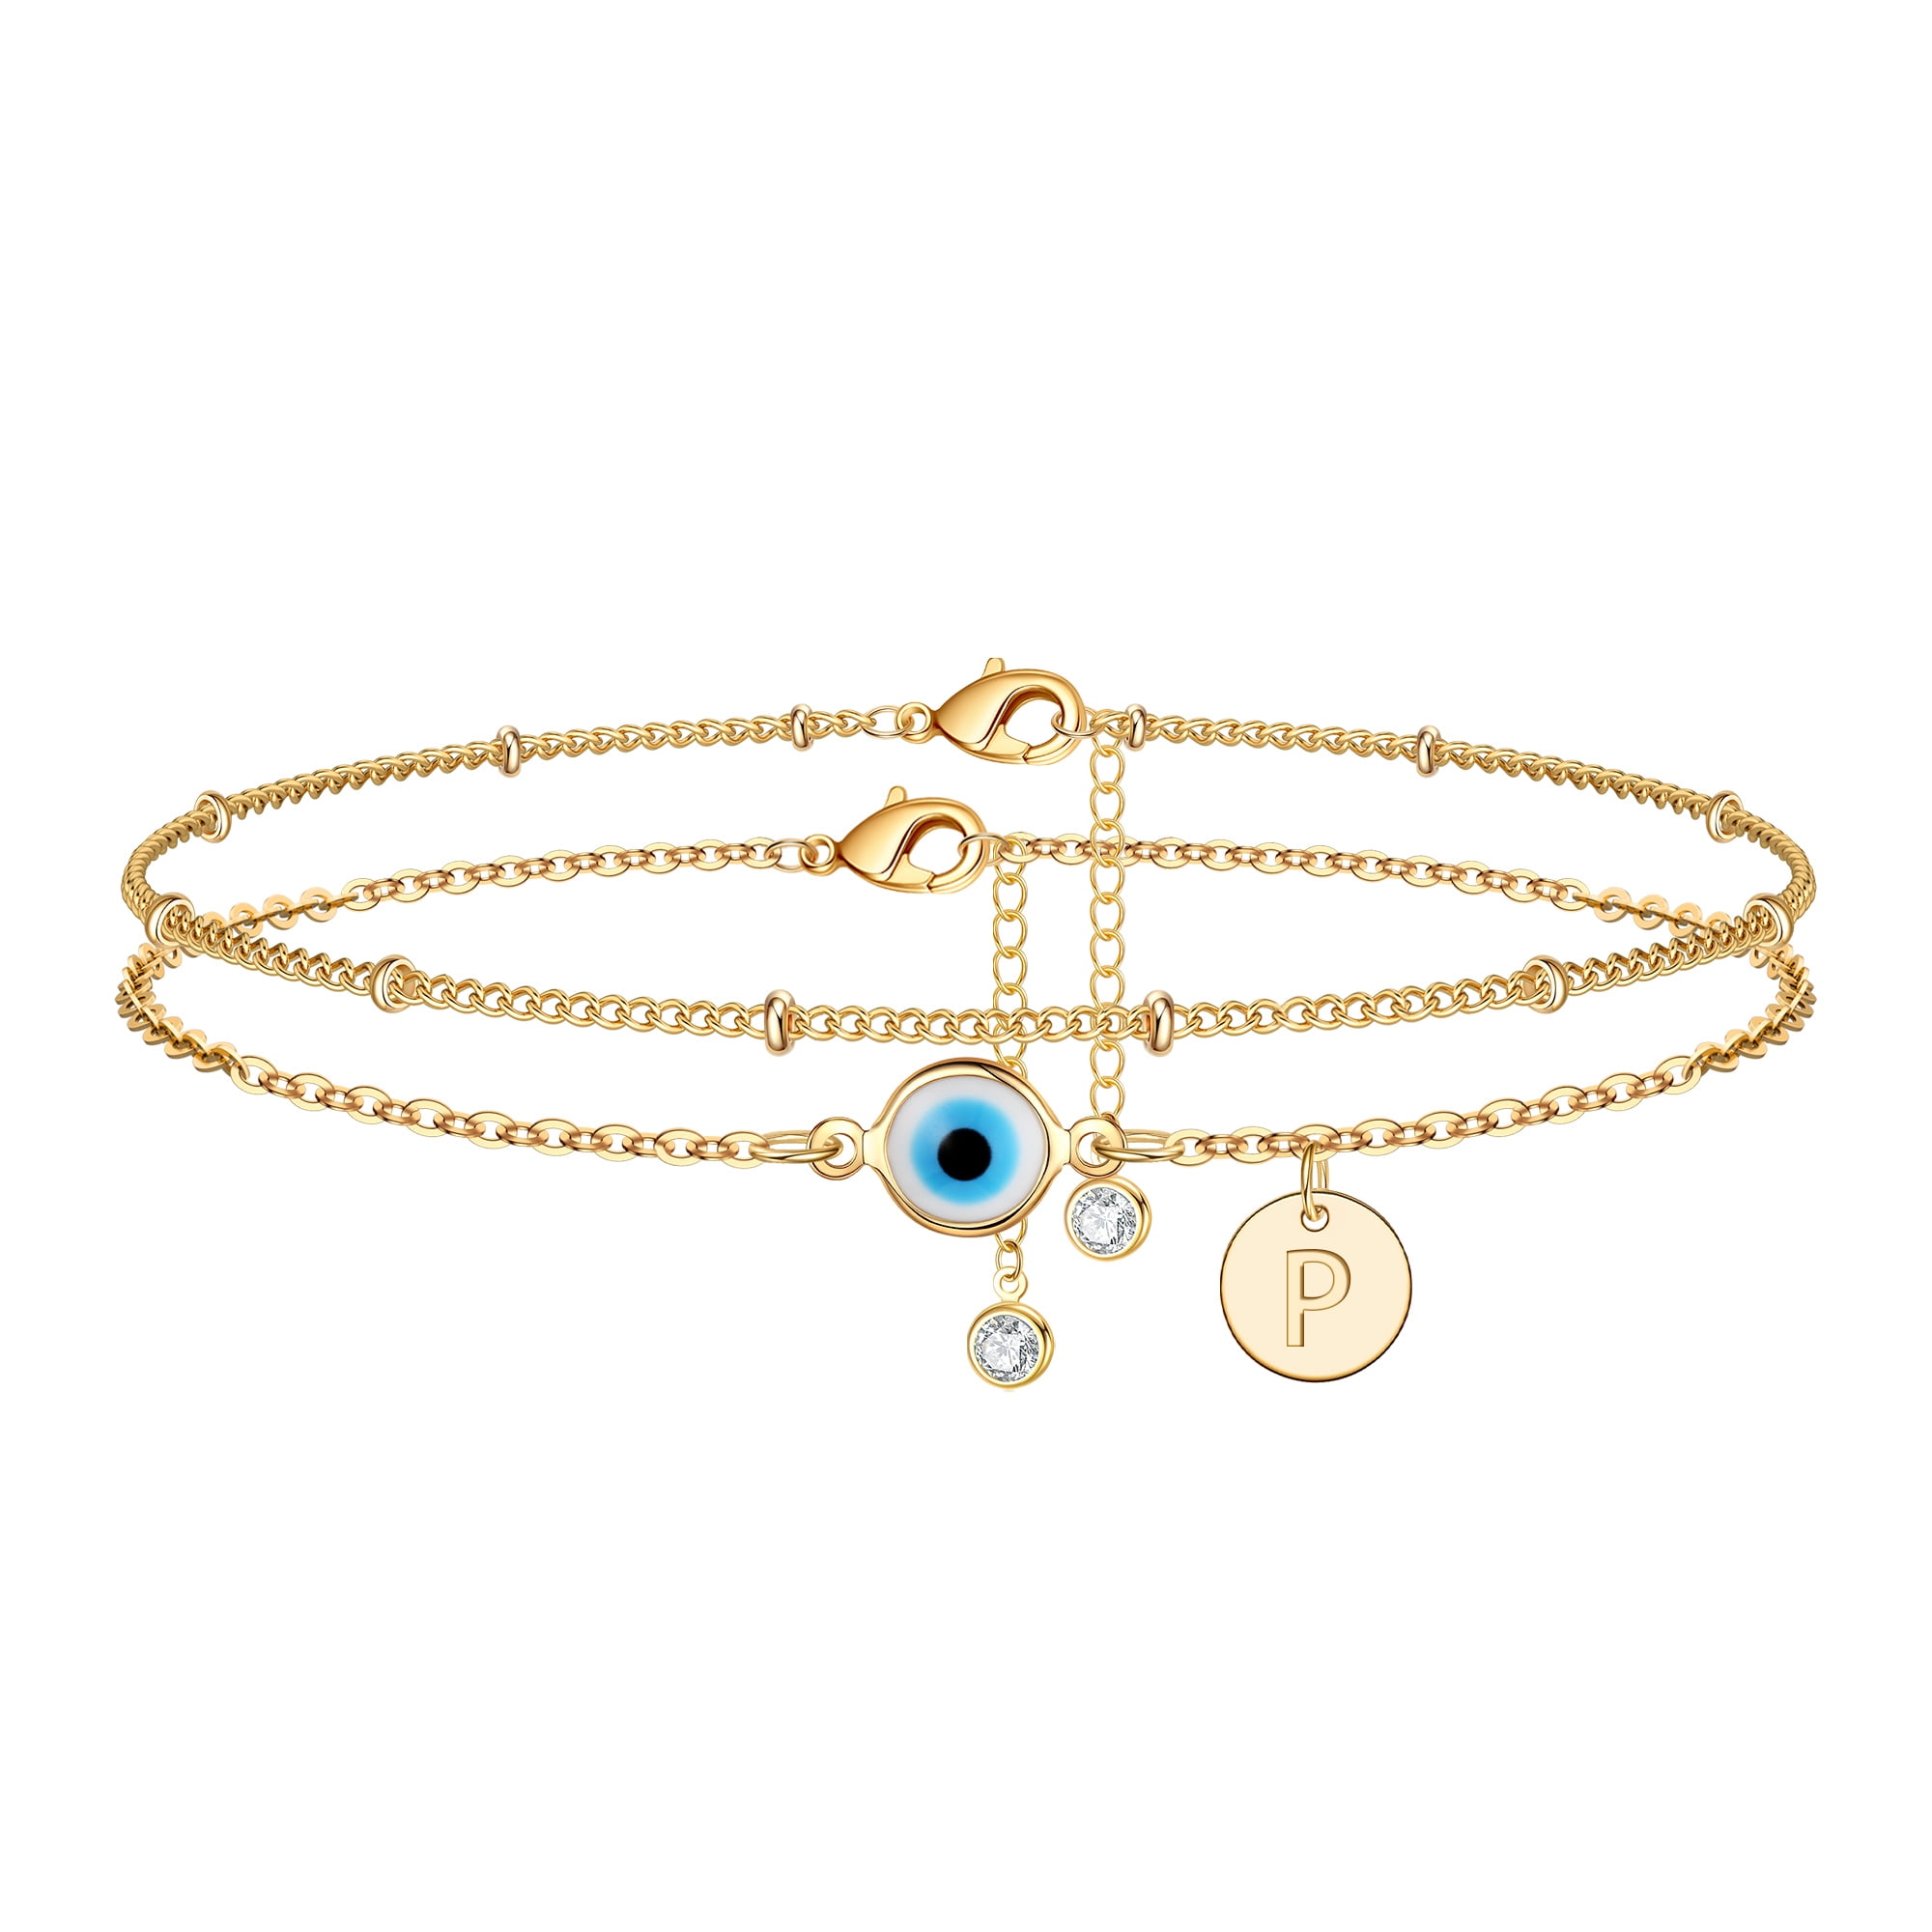 Gold Turkish Crystal Evil Eyes Evil Eye Pendant Caratlane For Women Elegant  Clavicle Chain Jewelry From Tjewelry, $1.54 | DHgate.Com